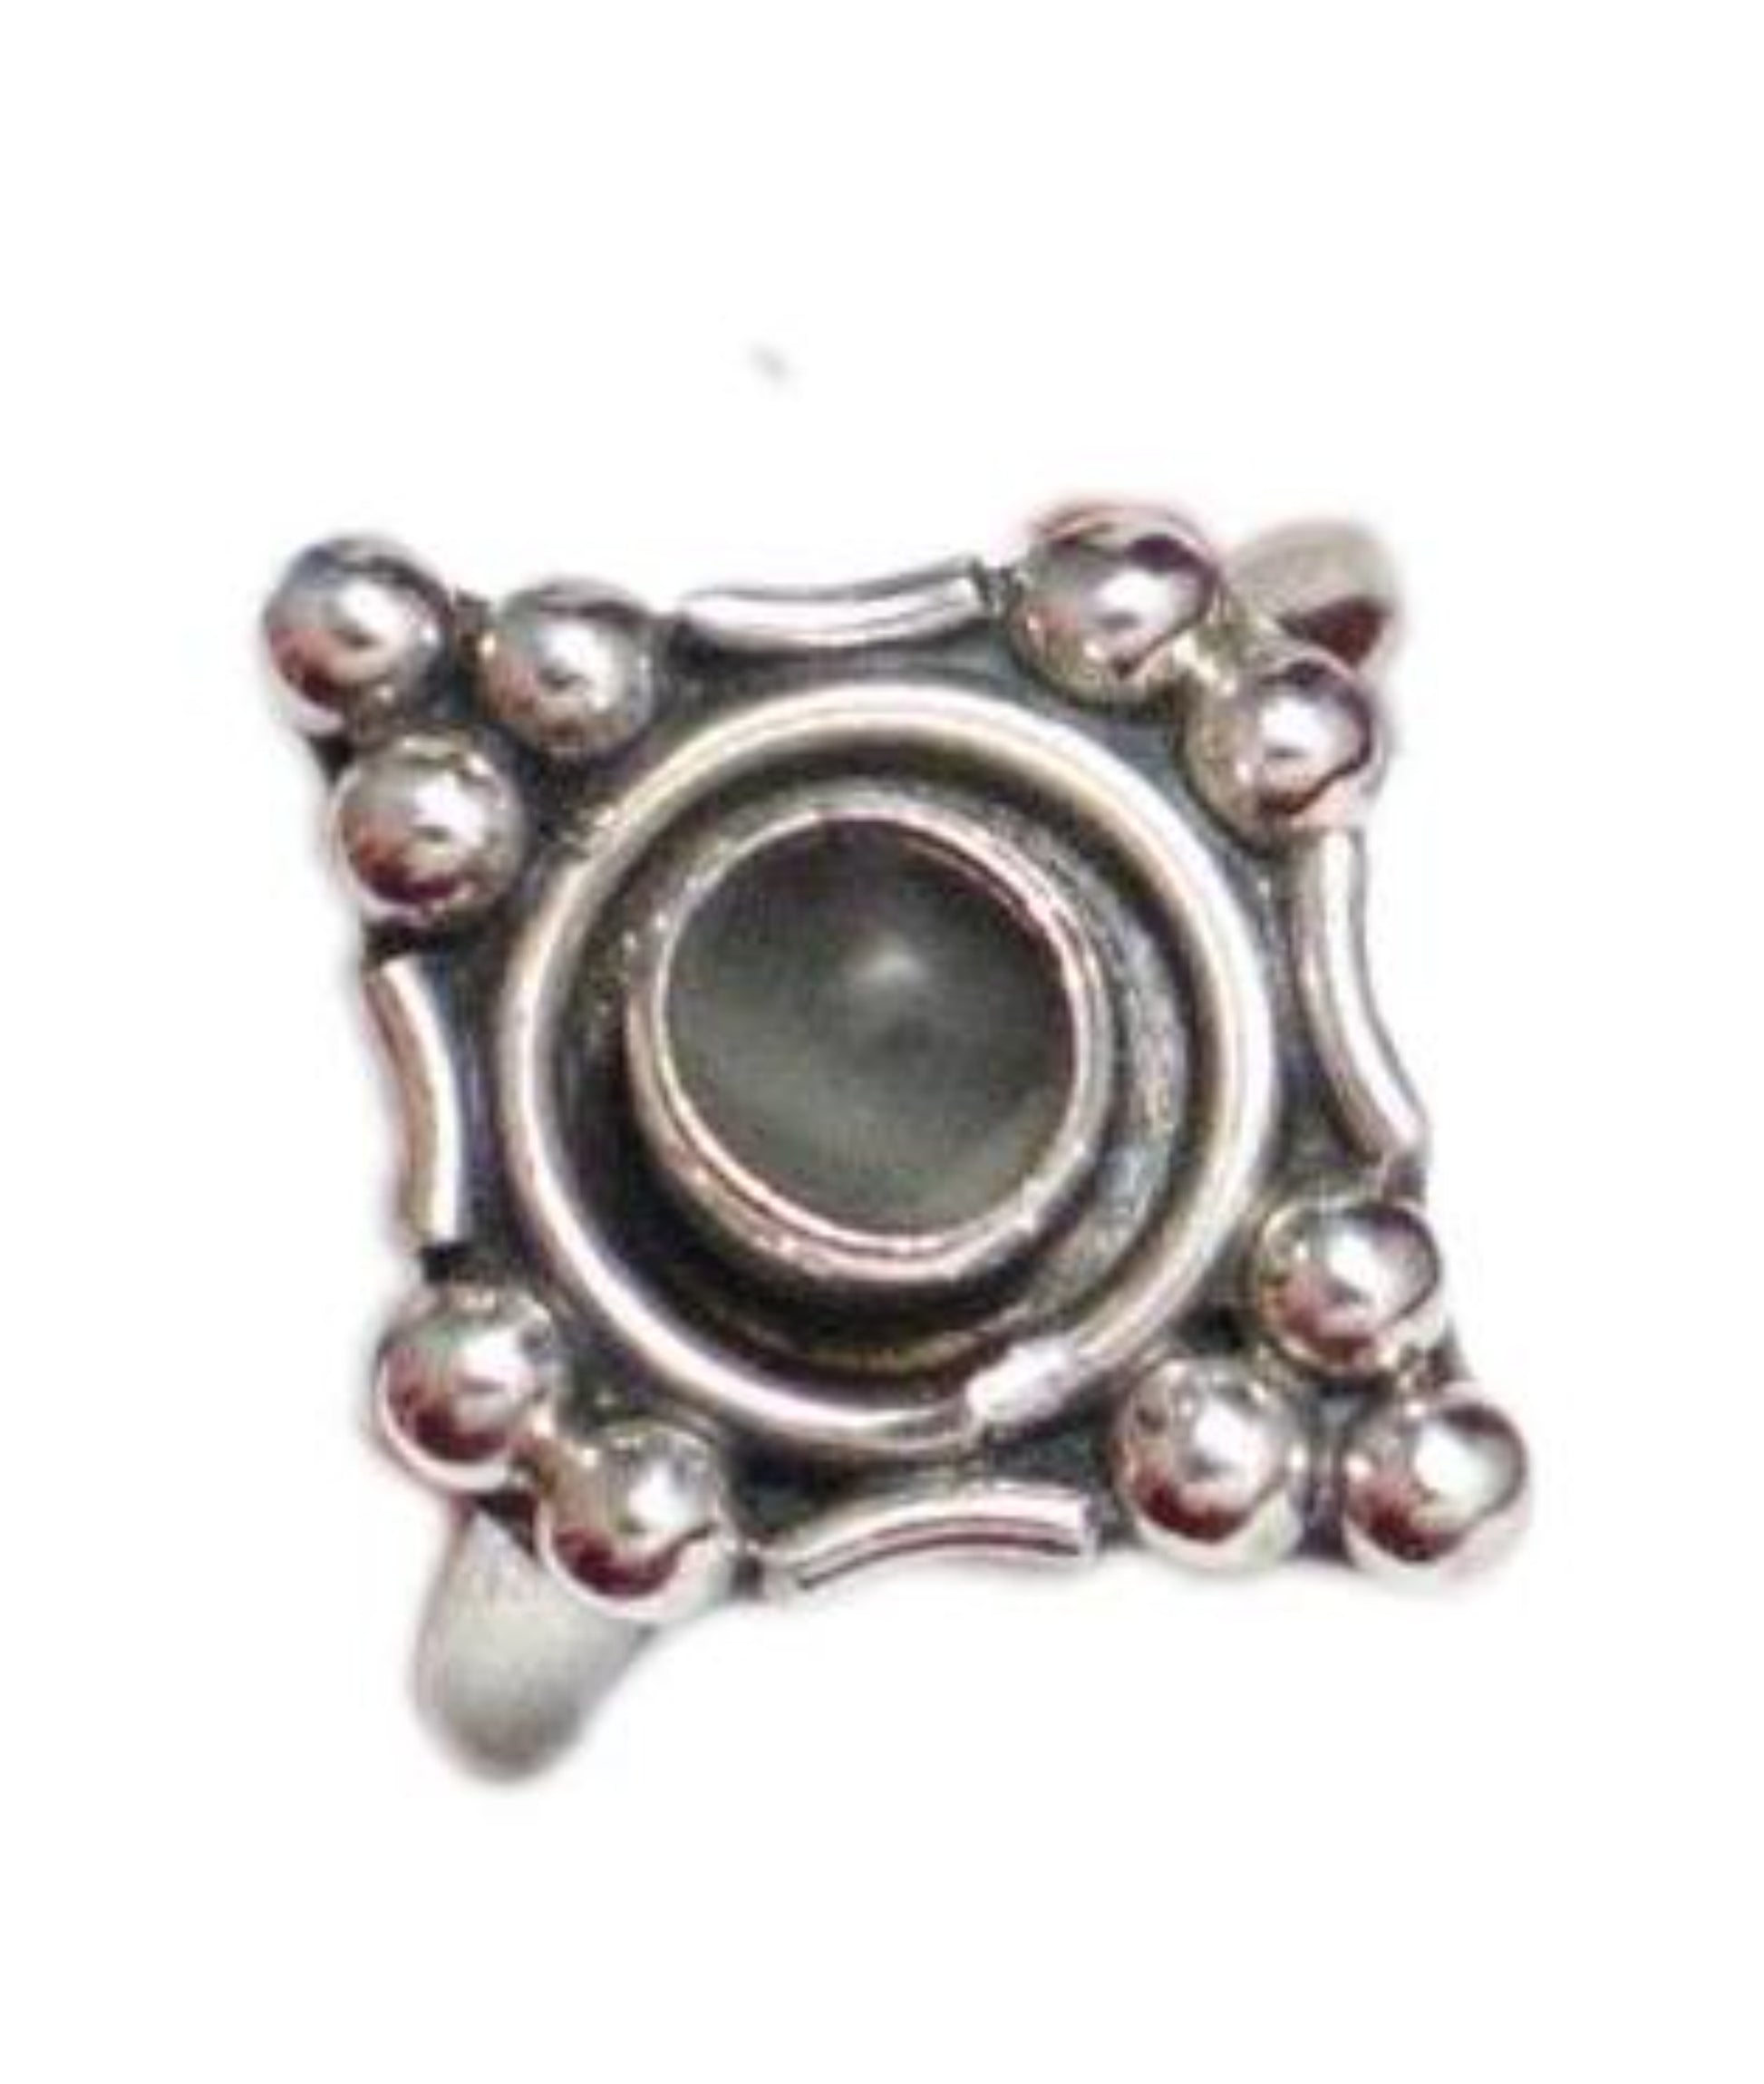 Rings | Vintage Sterling Silver Ring with Stone 5.75 | Discount Estate Jewelry online